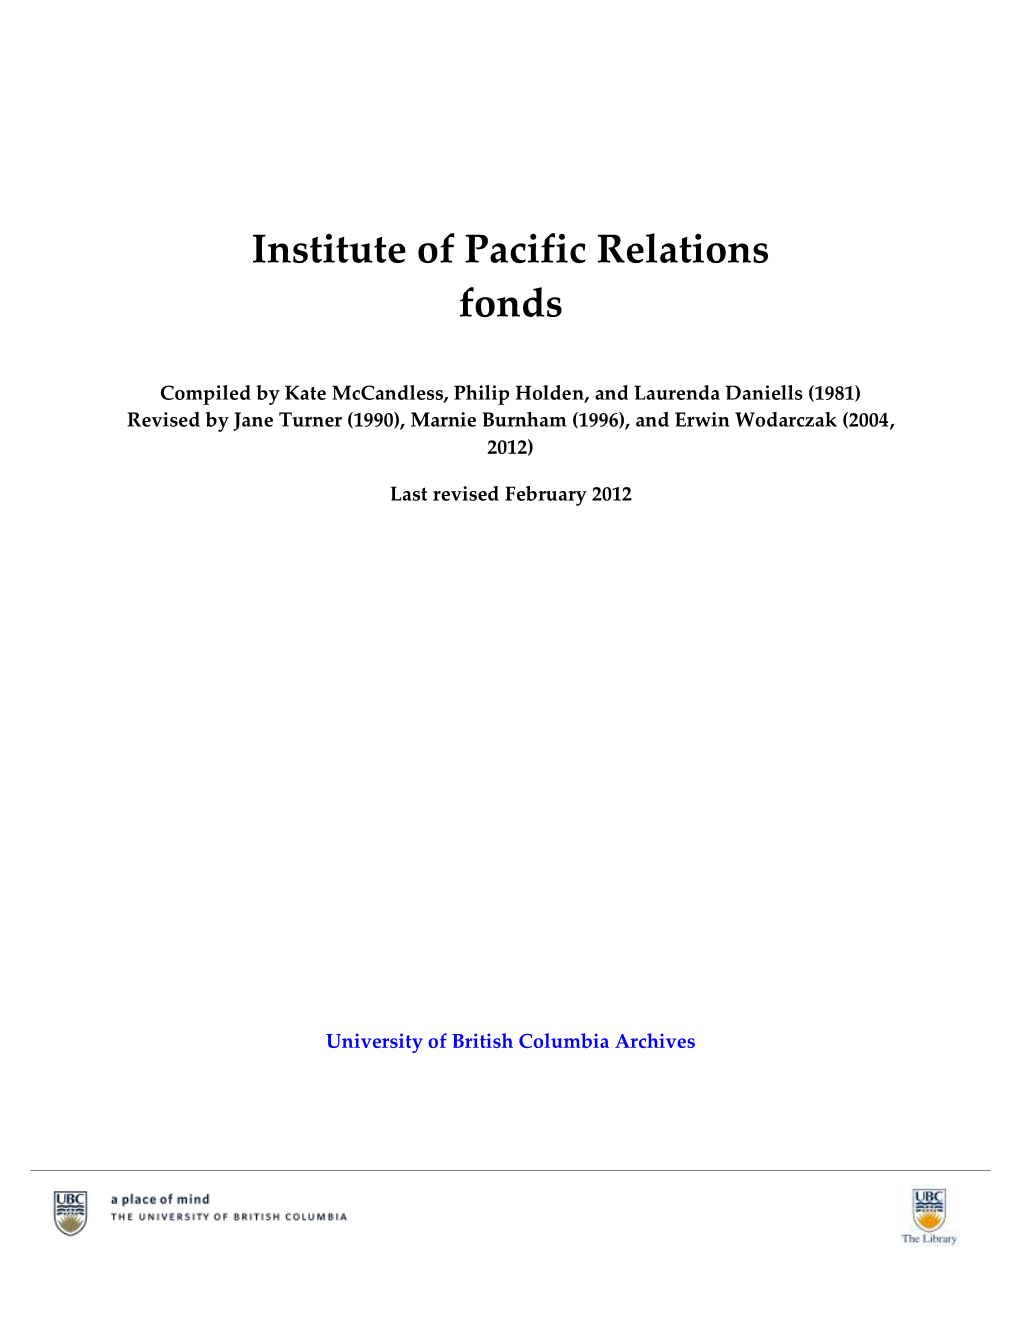 Institute of Pacific Relations Fonds